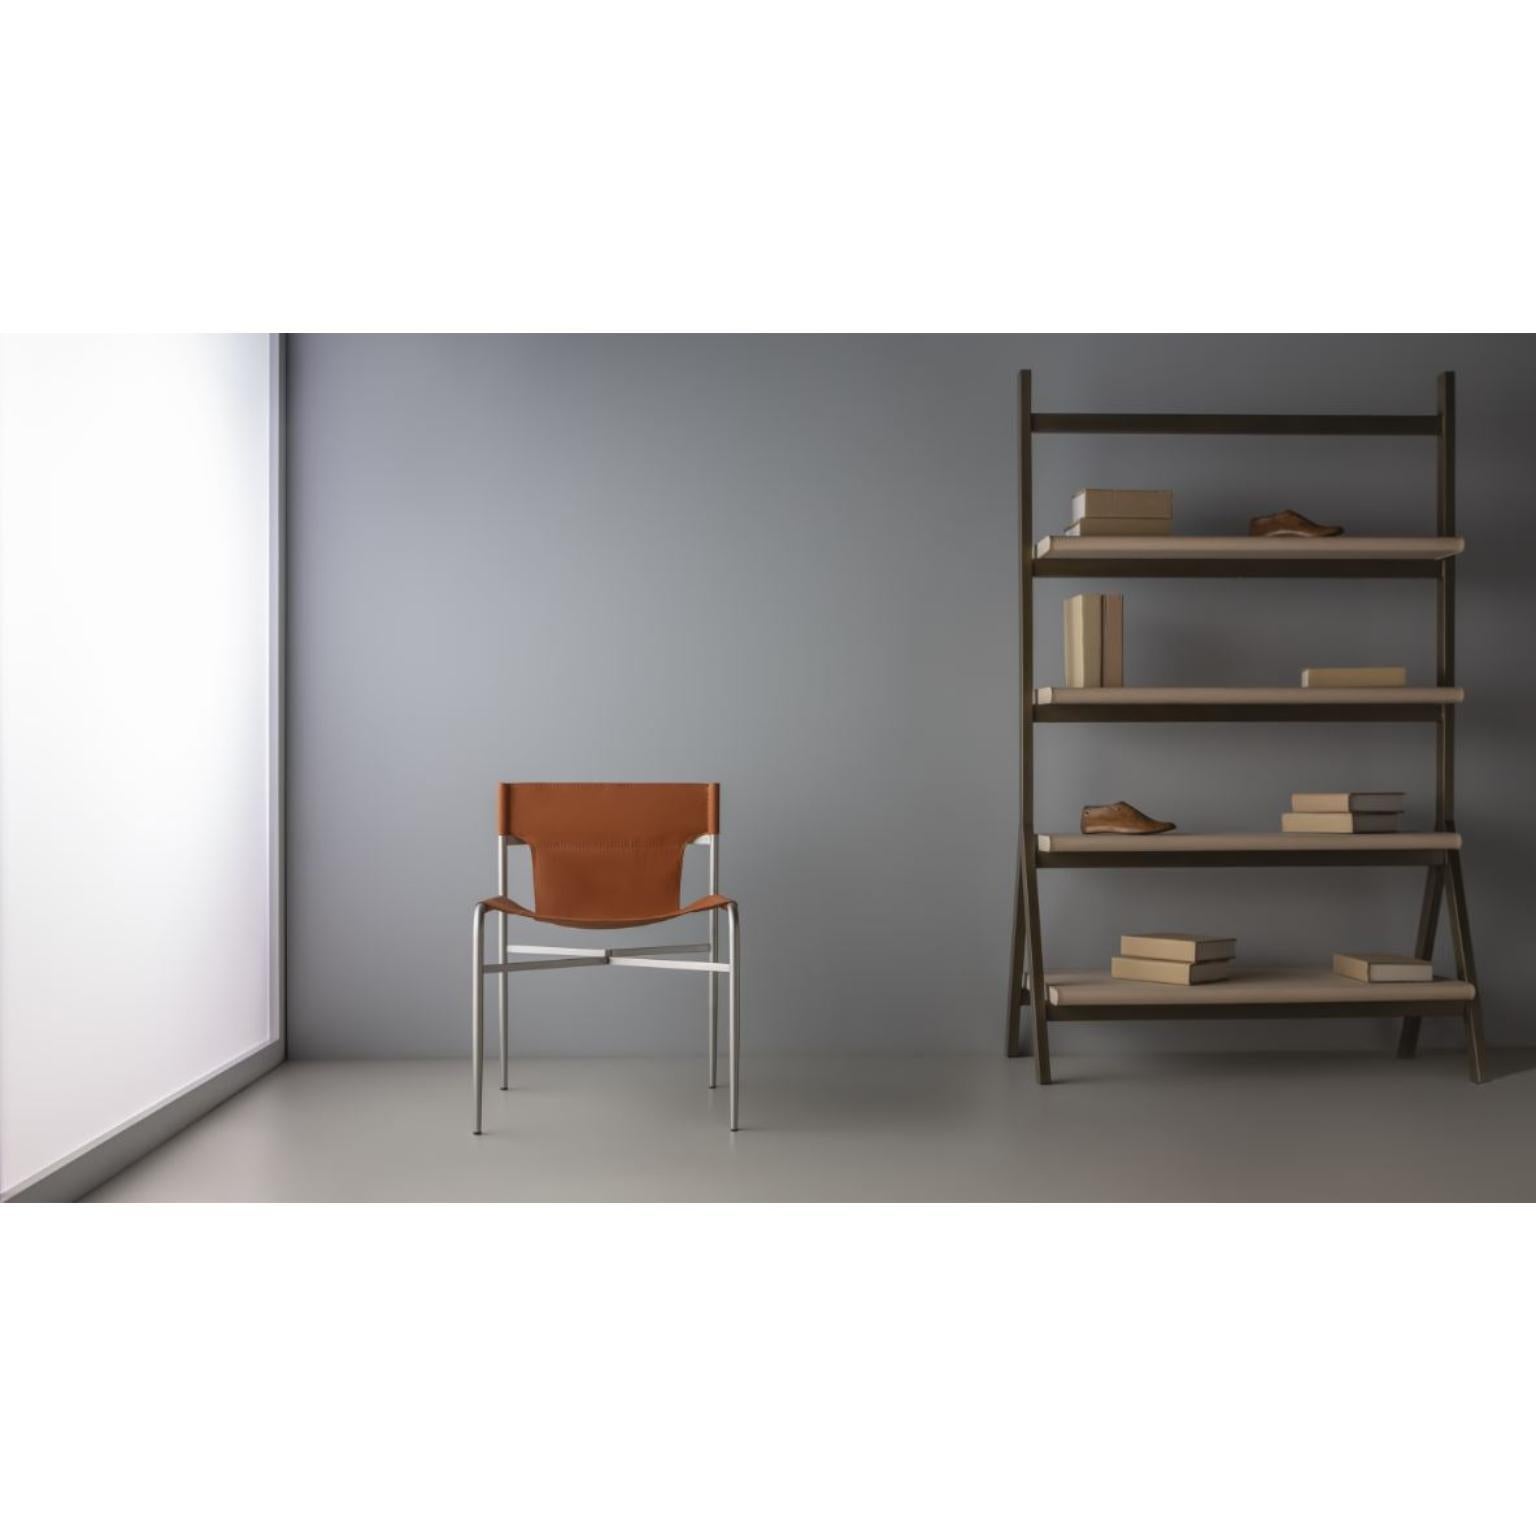 Bruta Chair by Doimo Brasil
Dimensions: W 56 x D 53 x H 81 cm 
Materials: Metal chair with upholstered seat.


With the intention of providing good taste and personality, Doimo deciphers trends and follows the evolution of man and his space. To this